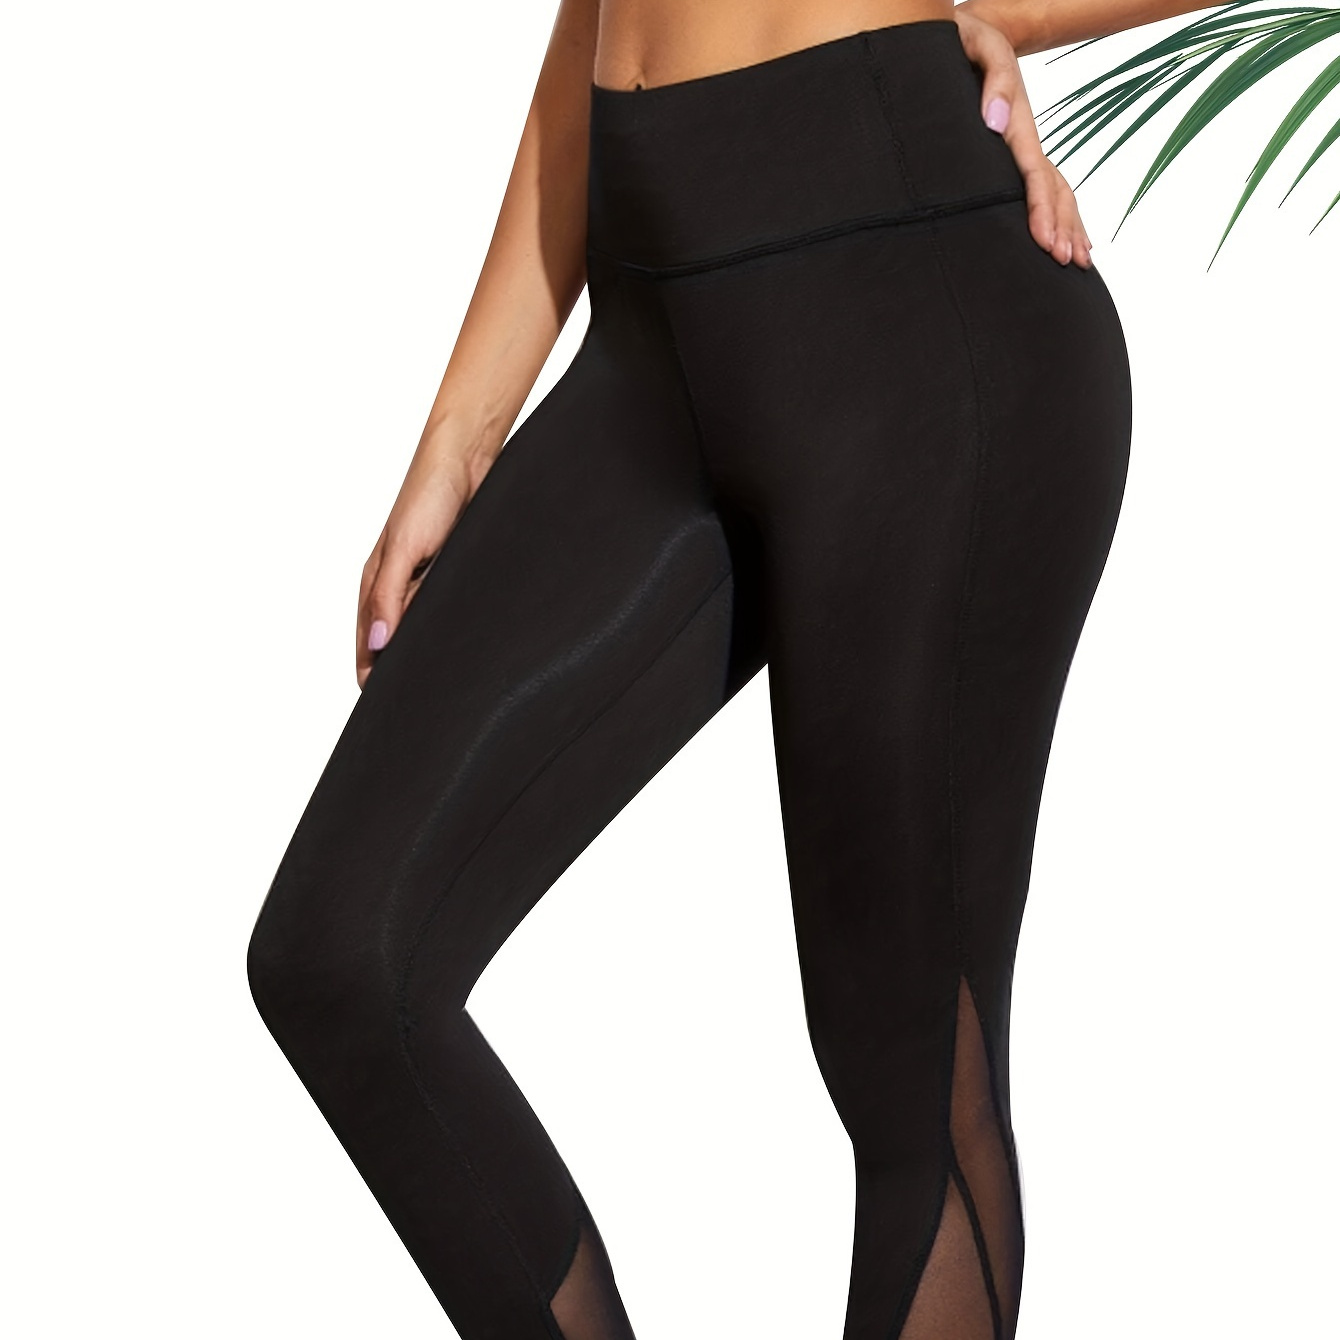 

High-waist Yoga Pants, Stretchy Athletic Leggings, Sports Style, Mesh Contrast Breathable Fabric, Activewear, Gym Wear, Women's Fitness Apparel